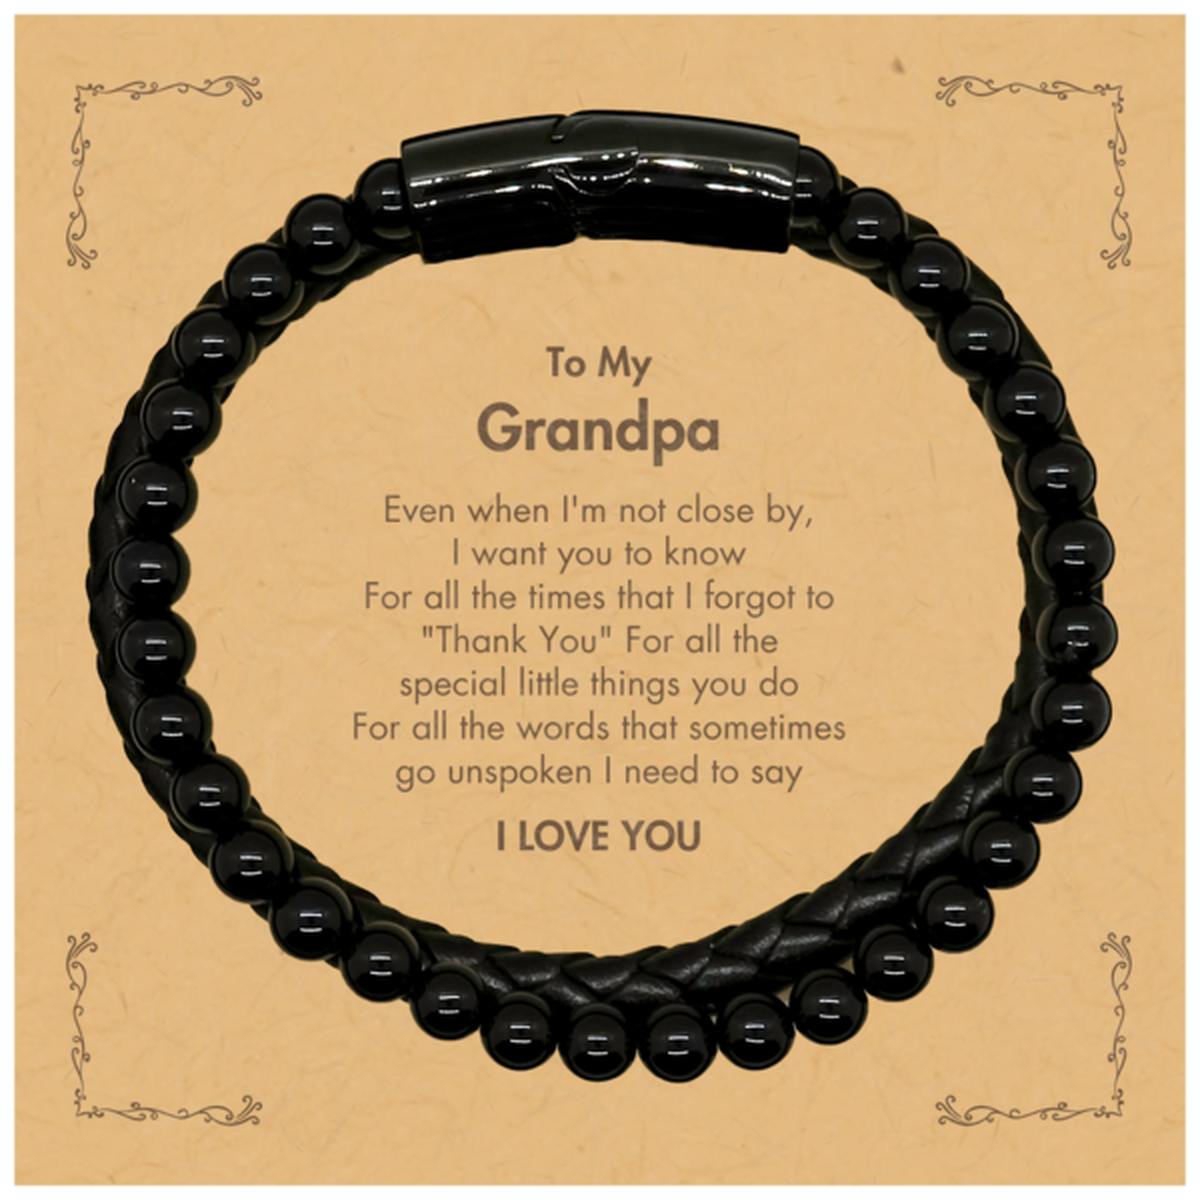 Thank You Gifts for Grandpa, Keepsake Stone Leather Bracelets Gifts for Grandpa Birthday Mother's day Father's Day Grandpa For all the words That sometimes go unspoken I need to say I LOVE YOU